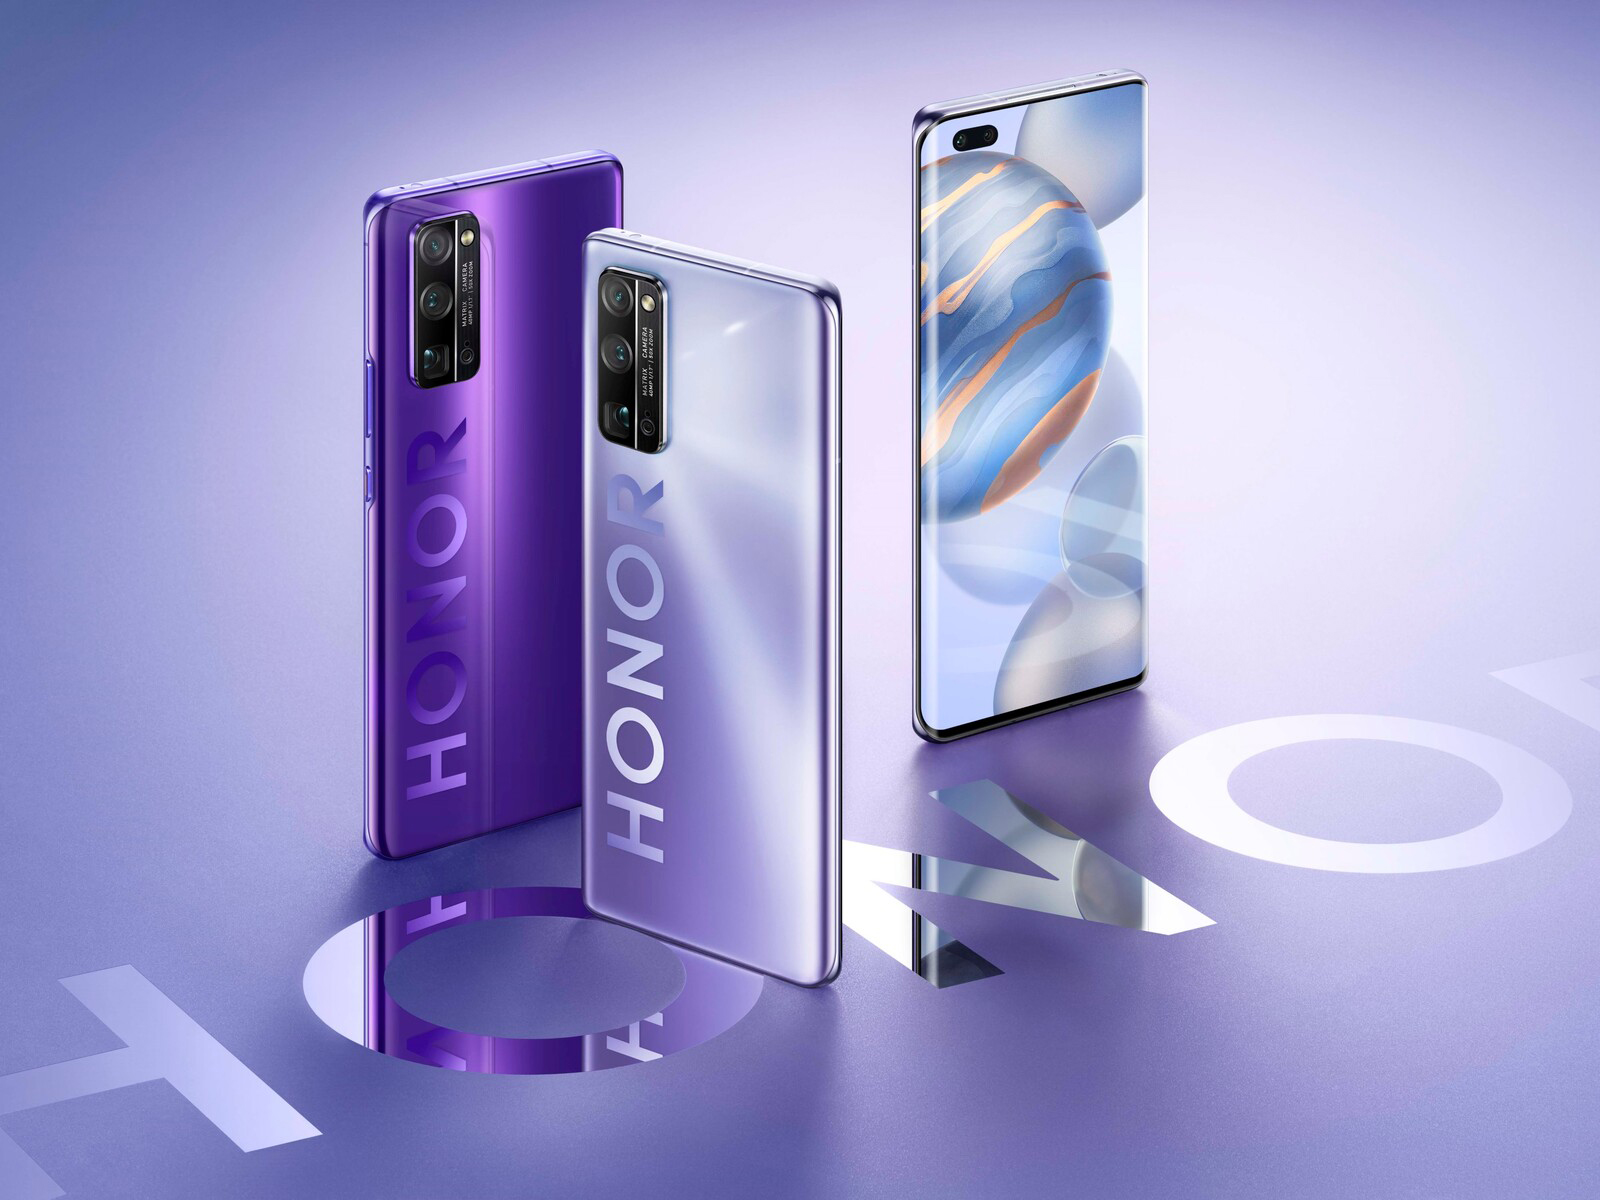 7.06-inch screen, MediaTek Dimensity 900 chip and 6000mAh battery: an insider revealed the specifications of Honor X30 Max